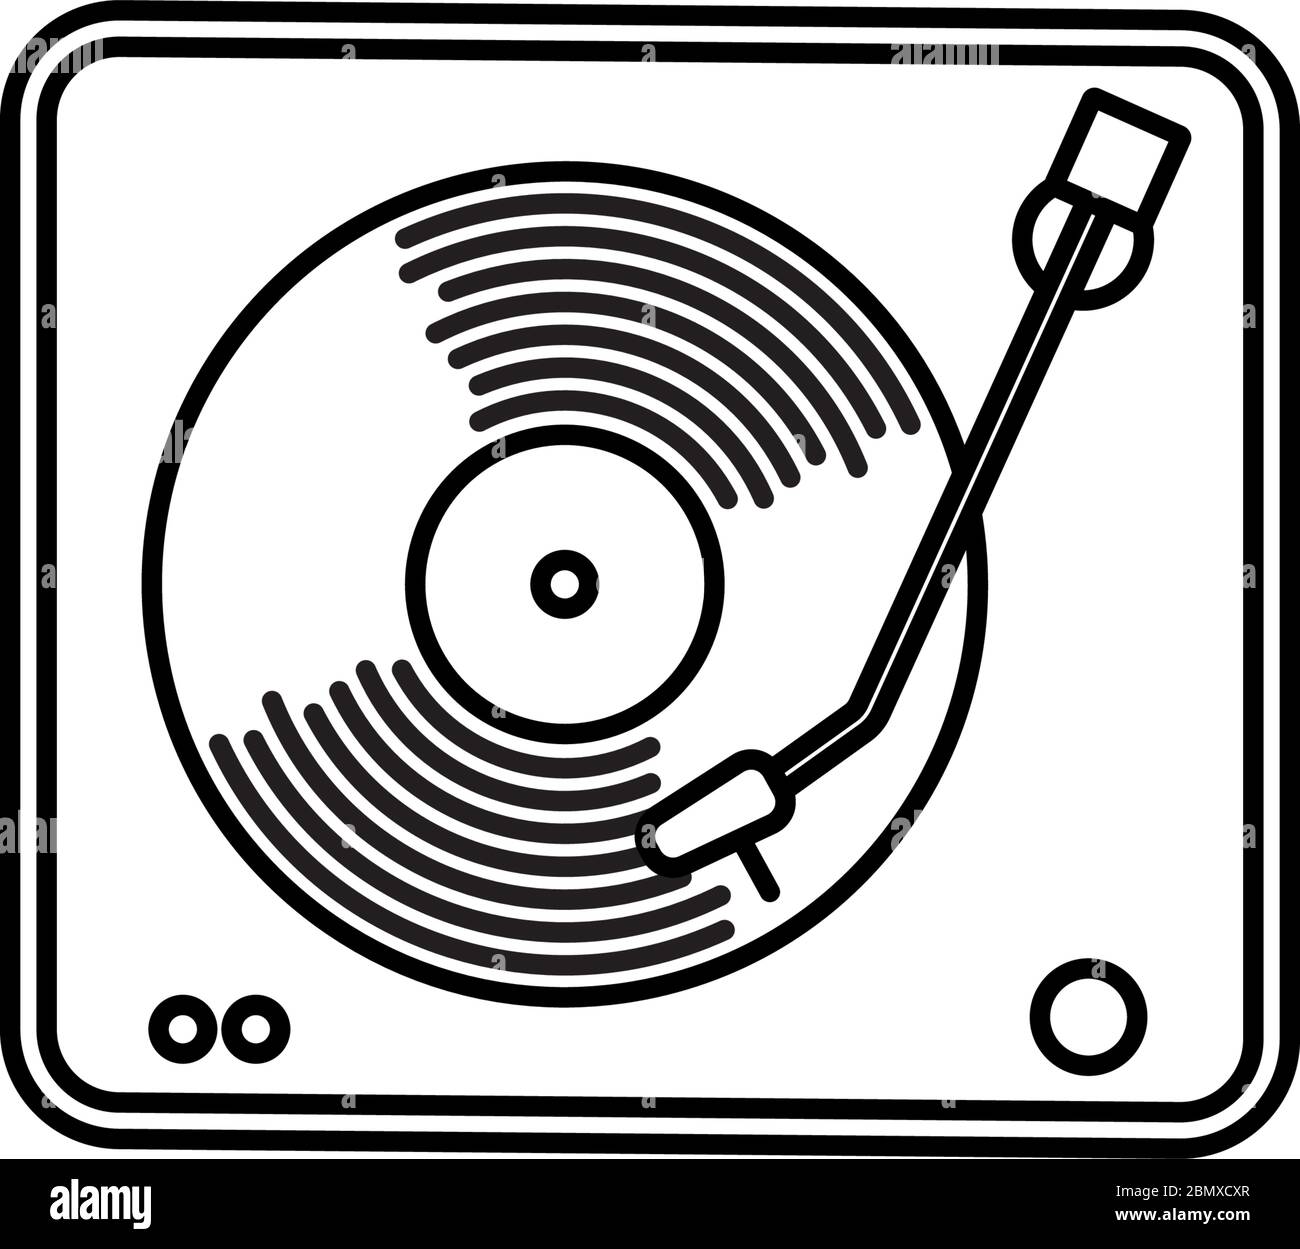 Vintage turntable vector line icon. Vinyl recordings and home electronics outline symbol. Stock Vector